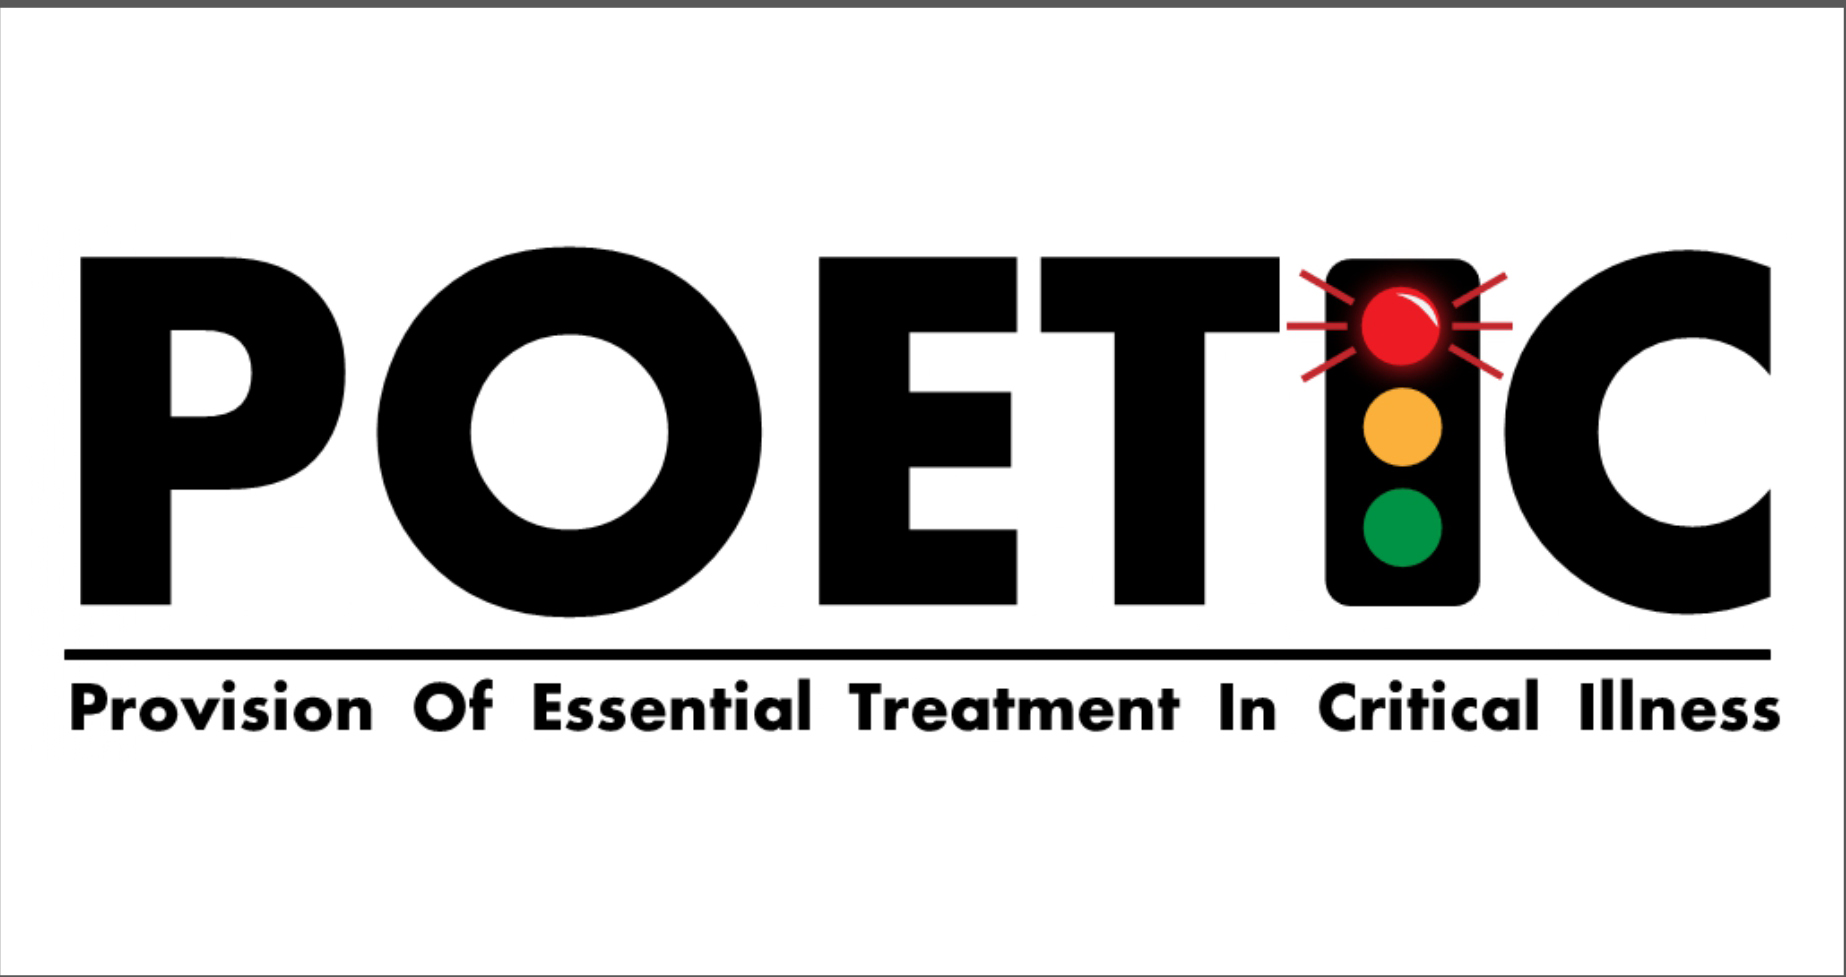 Provision of Essential Treatment in Critical Illness